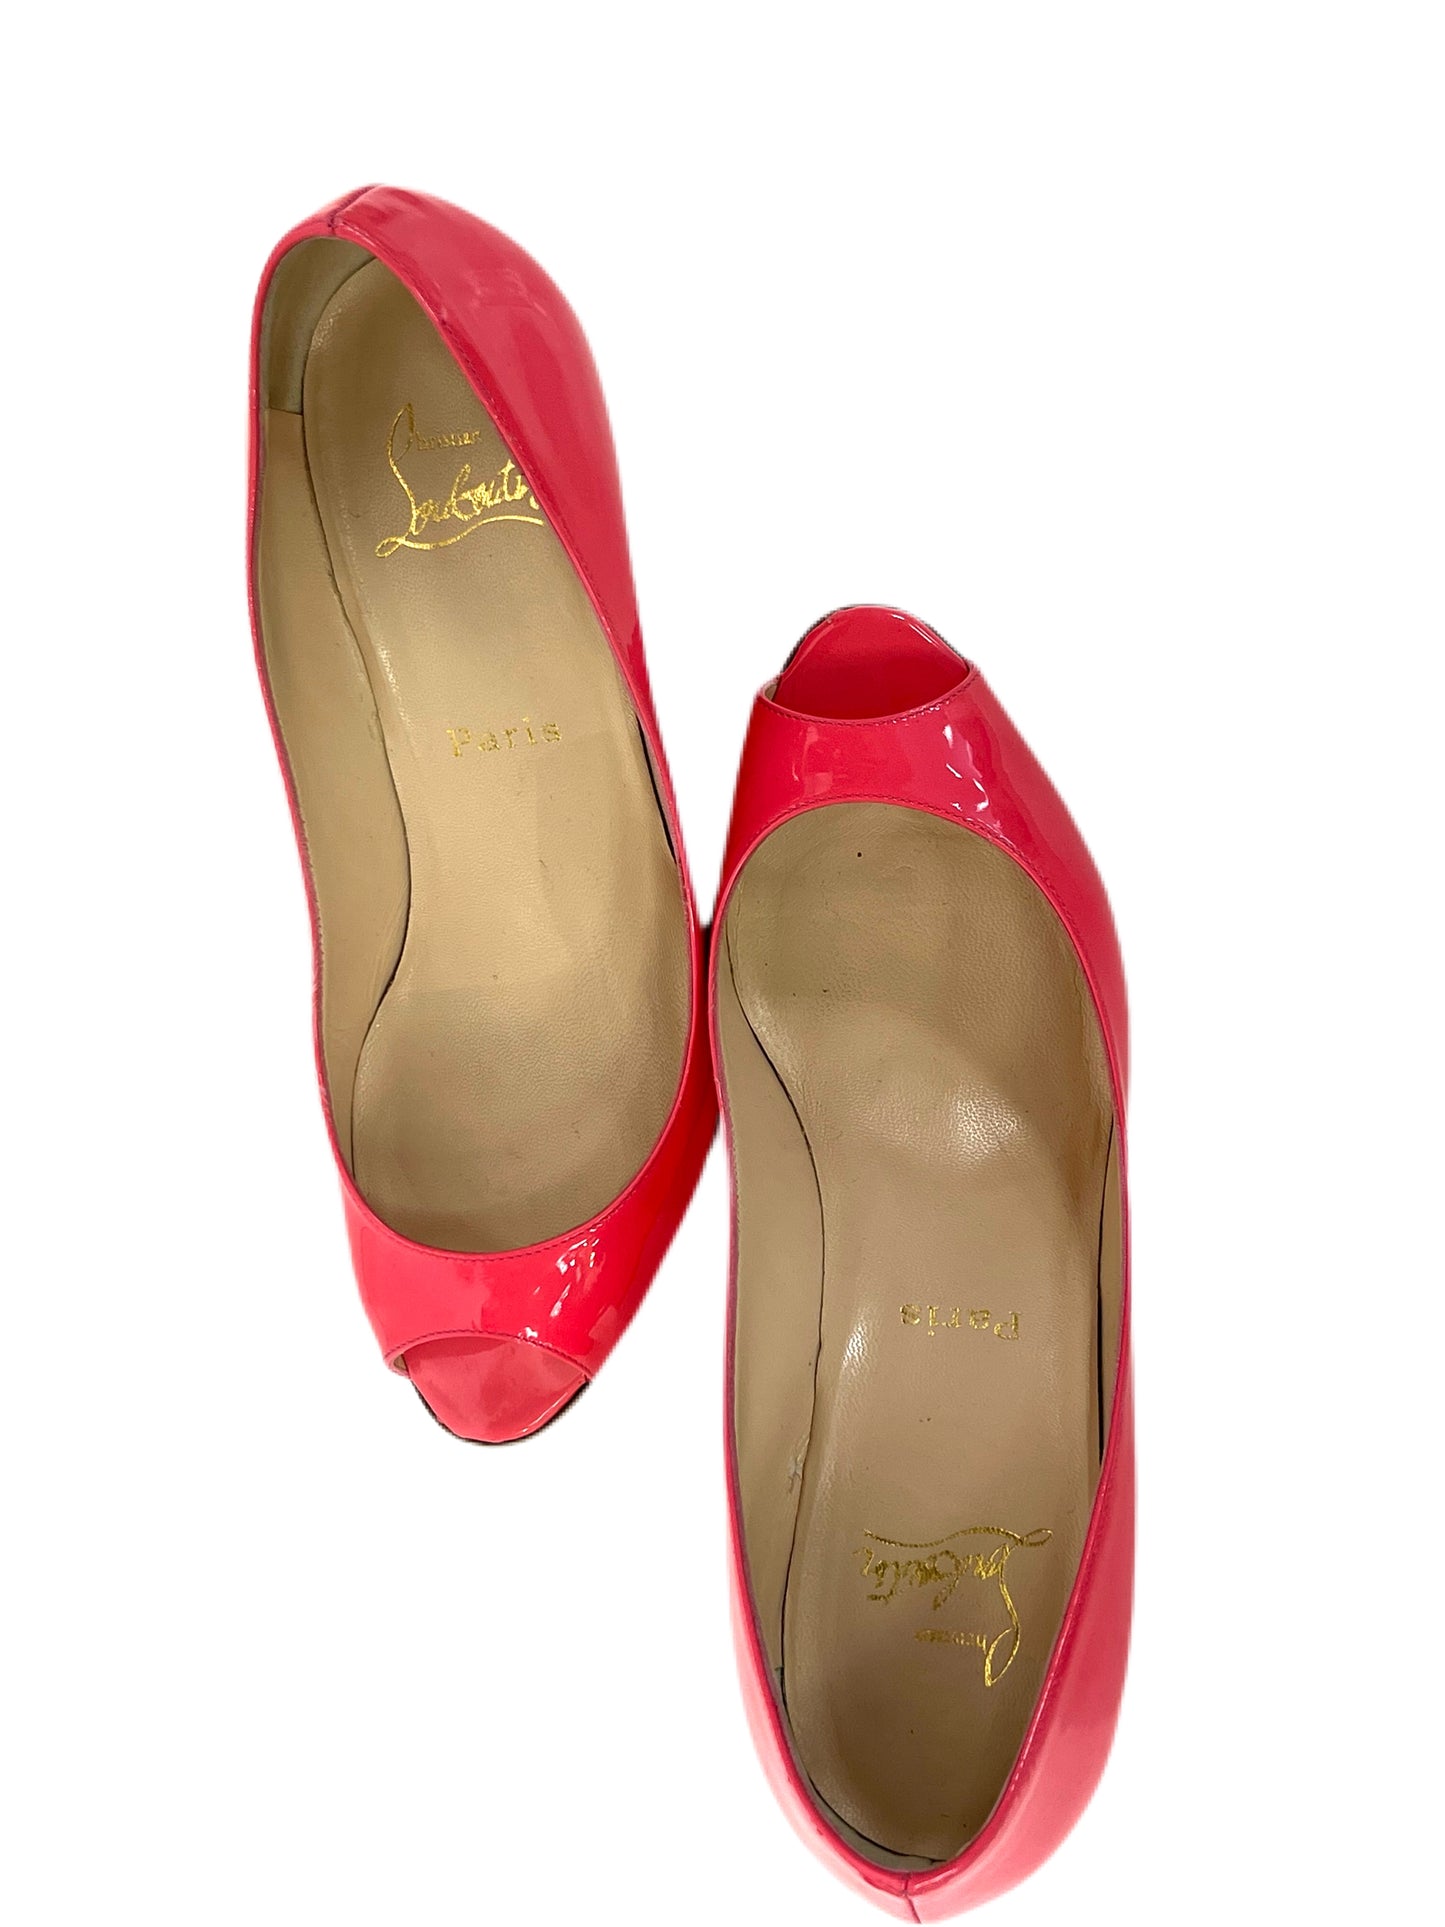 CHRISTIAN LOUBOUTIN Patent Leather Wedges Hot Pink Size 39